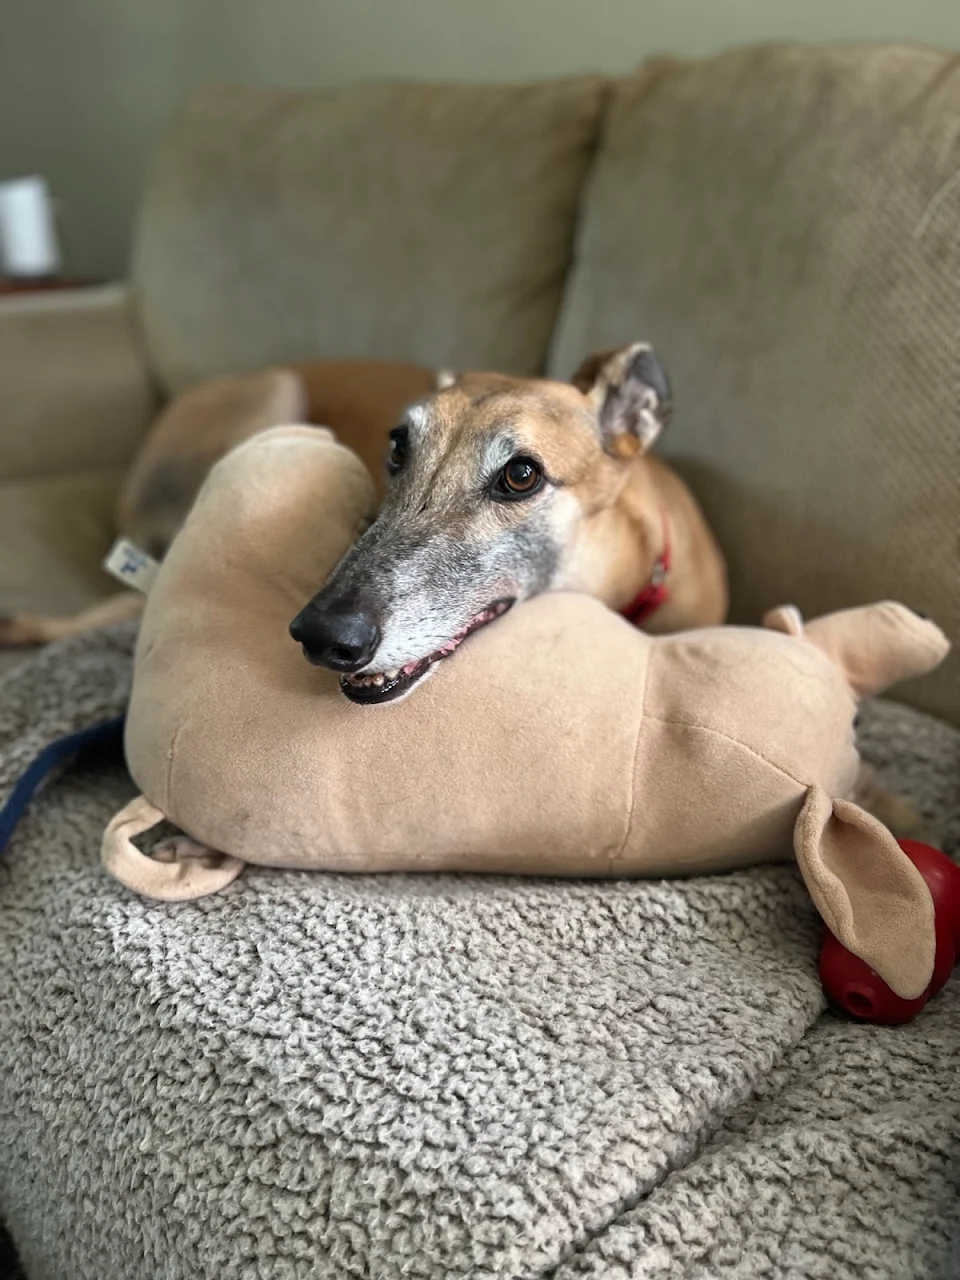 Can we make rescue greyhounds a thing now? Here’s Bones enjoying his retirement from racing